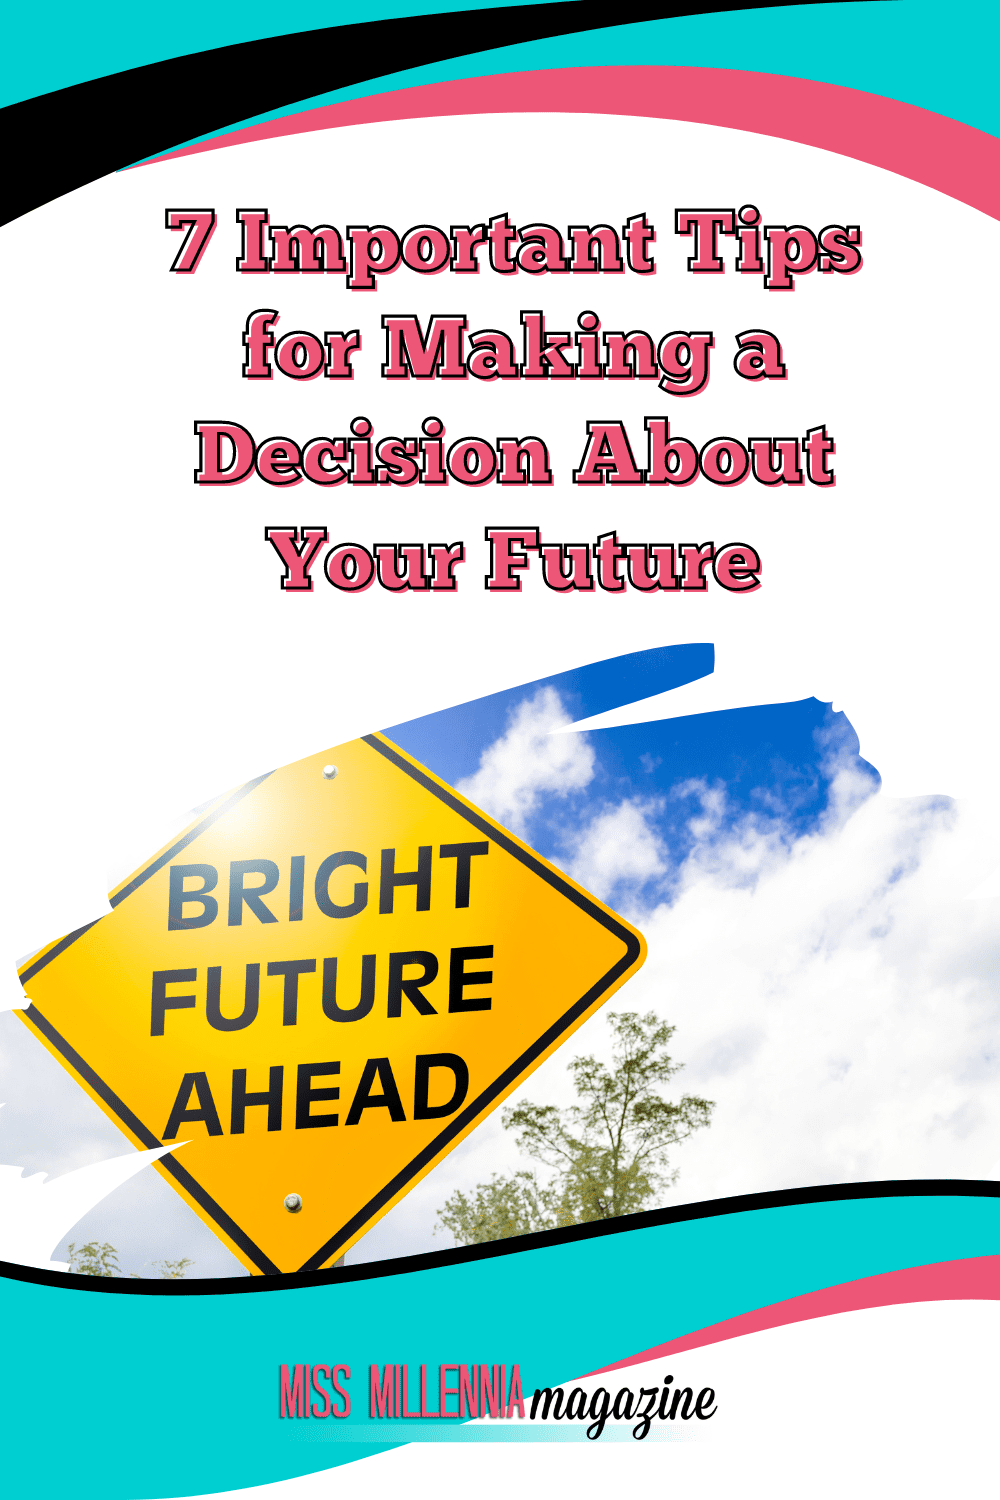 How To Make a Big Decision About Your Future